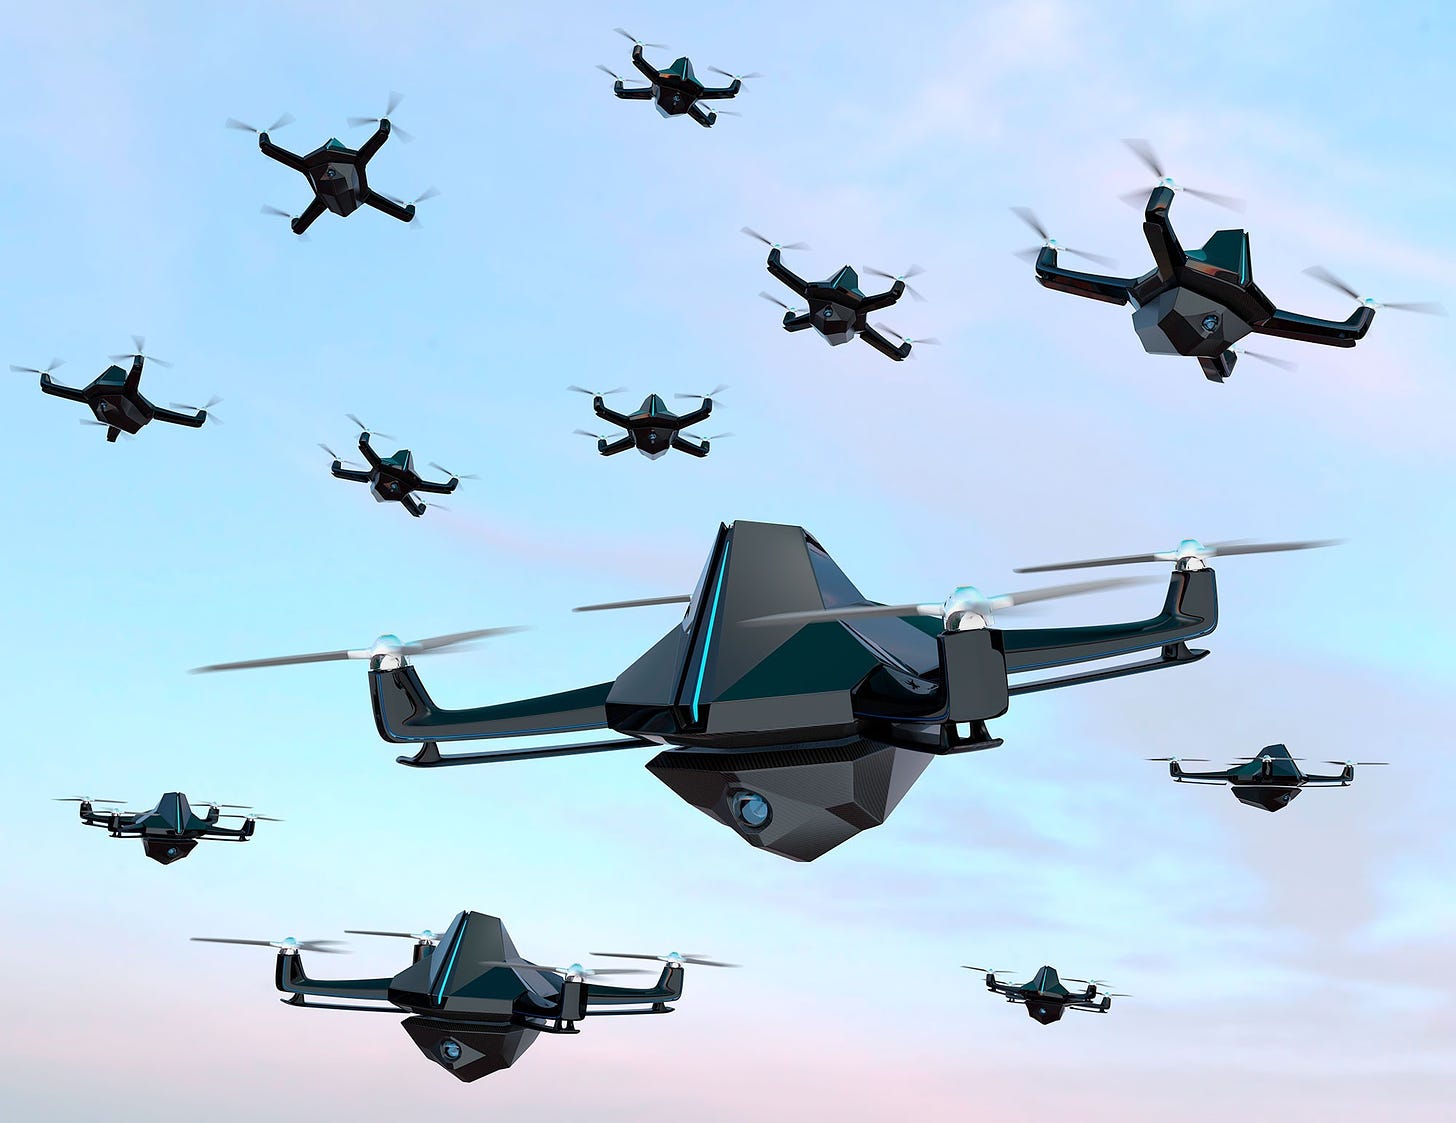 Army advances learning capabilities of drone swarms | Article | The United  States Army